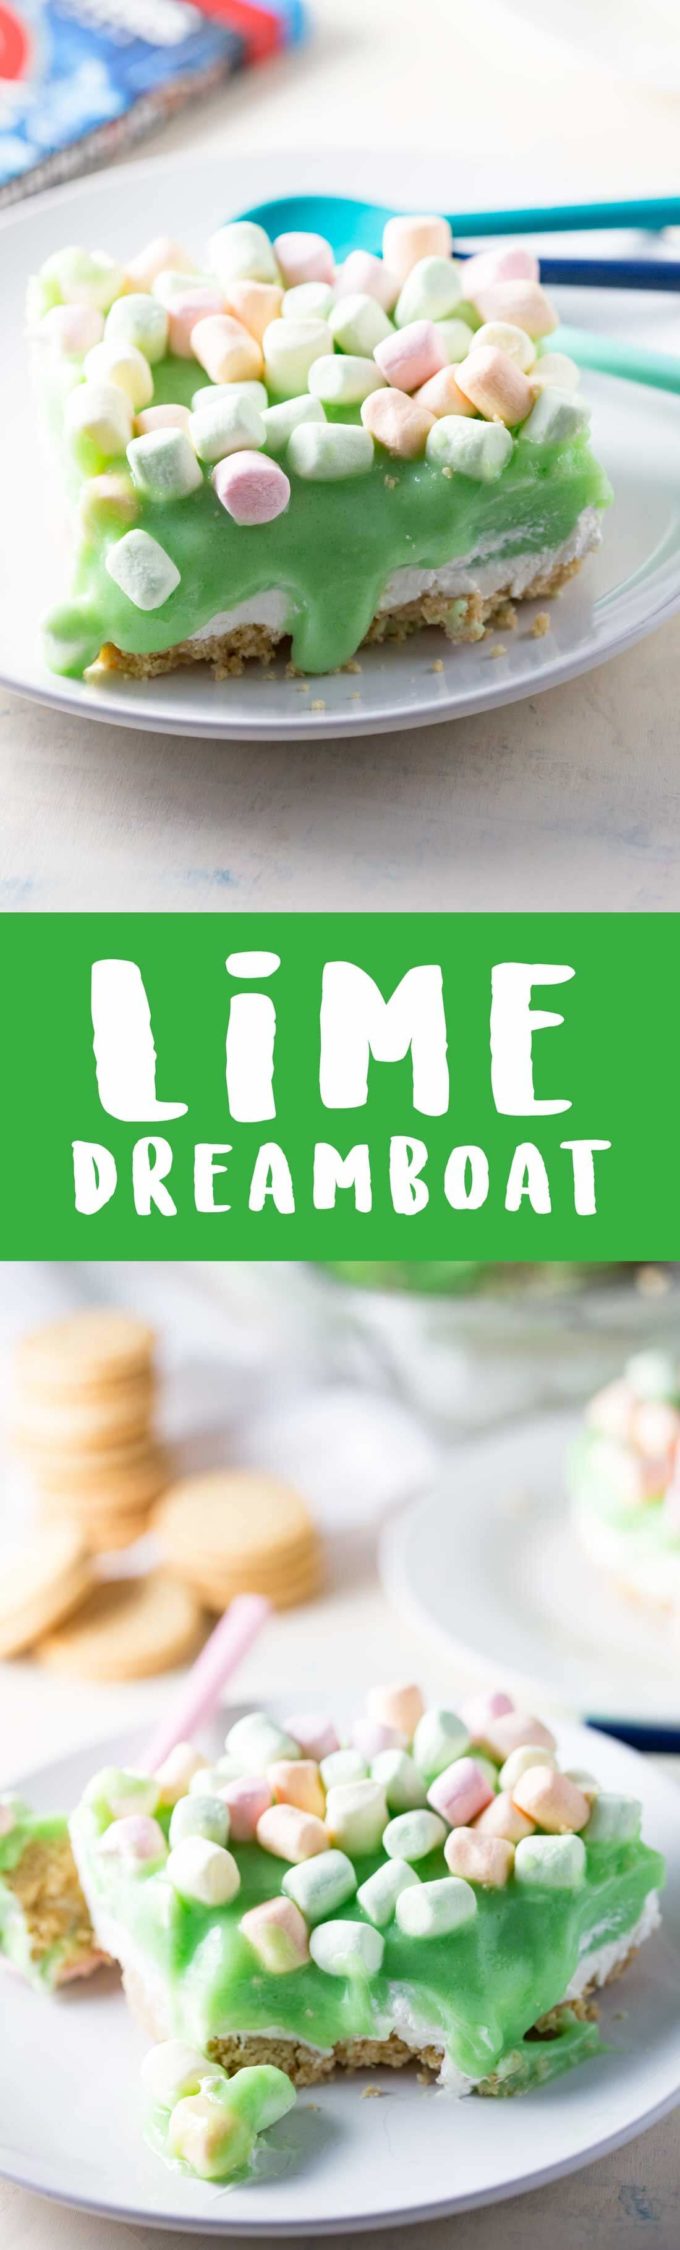 This creamy luscious dessert is a lime dreamboat, layers of yummy. 